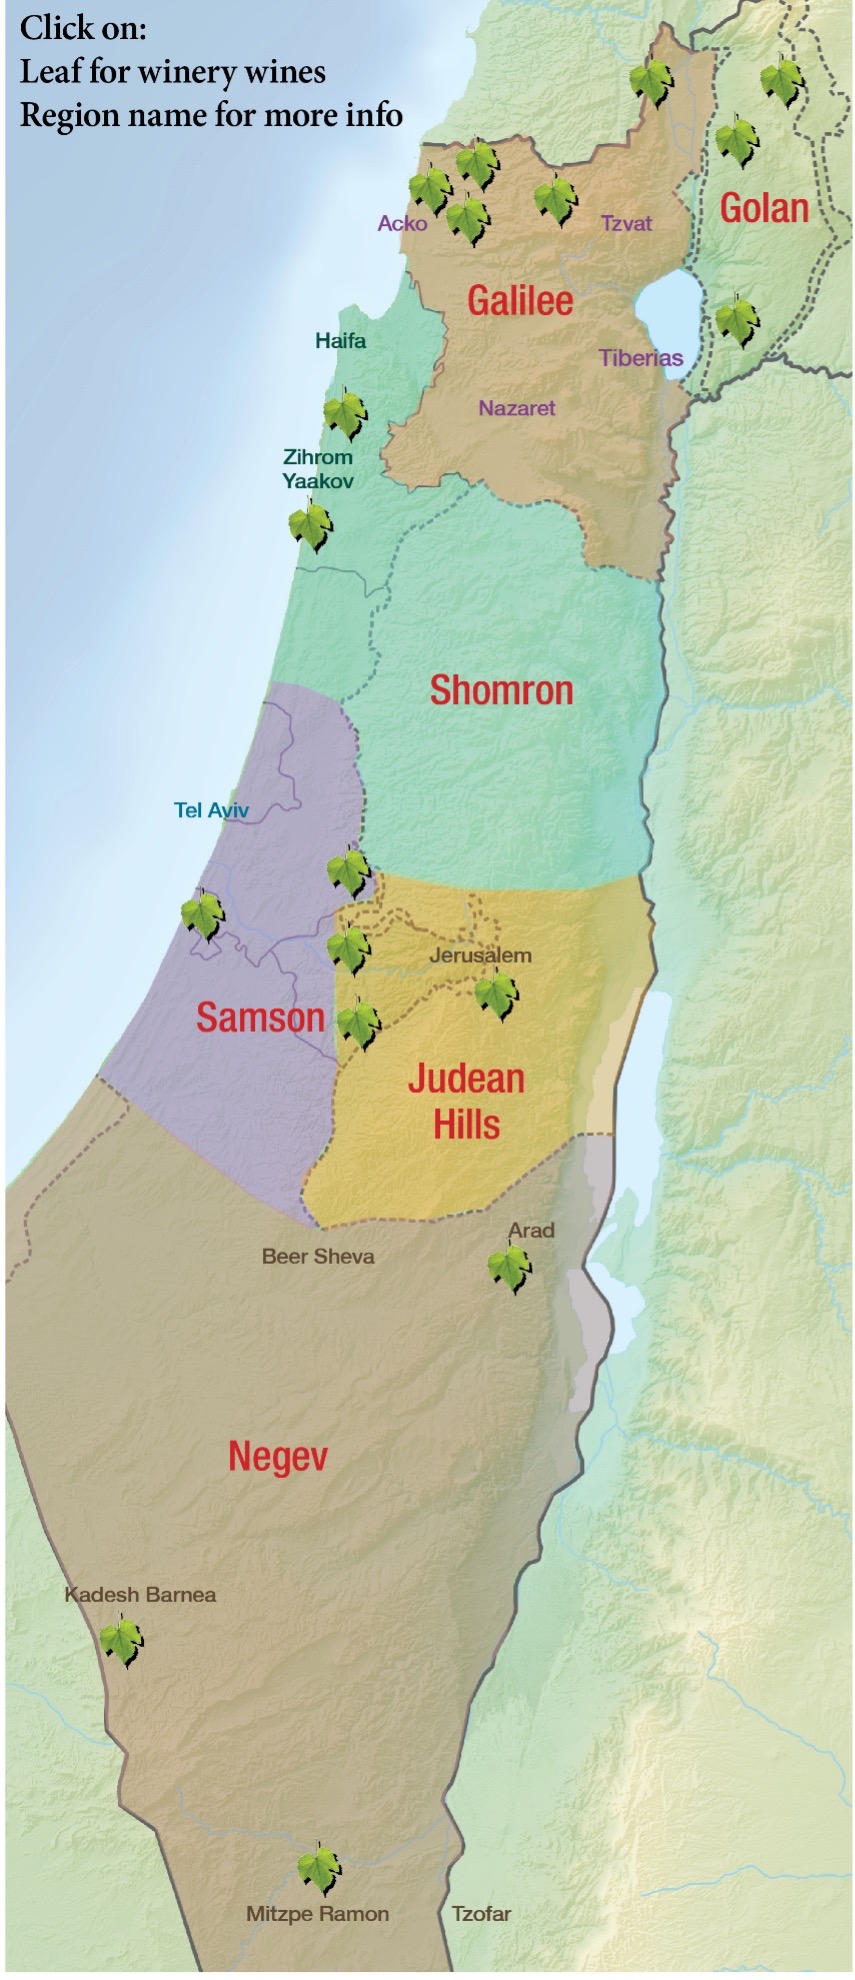 Map of Wineries and Regions in Israel